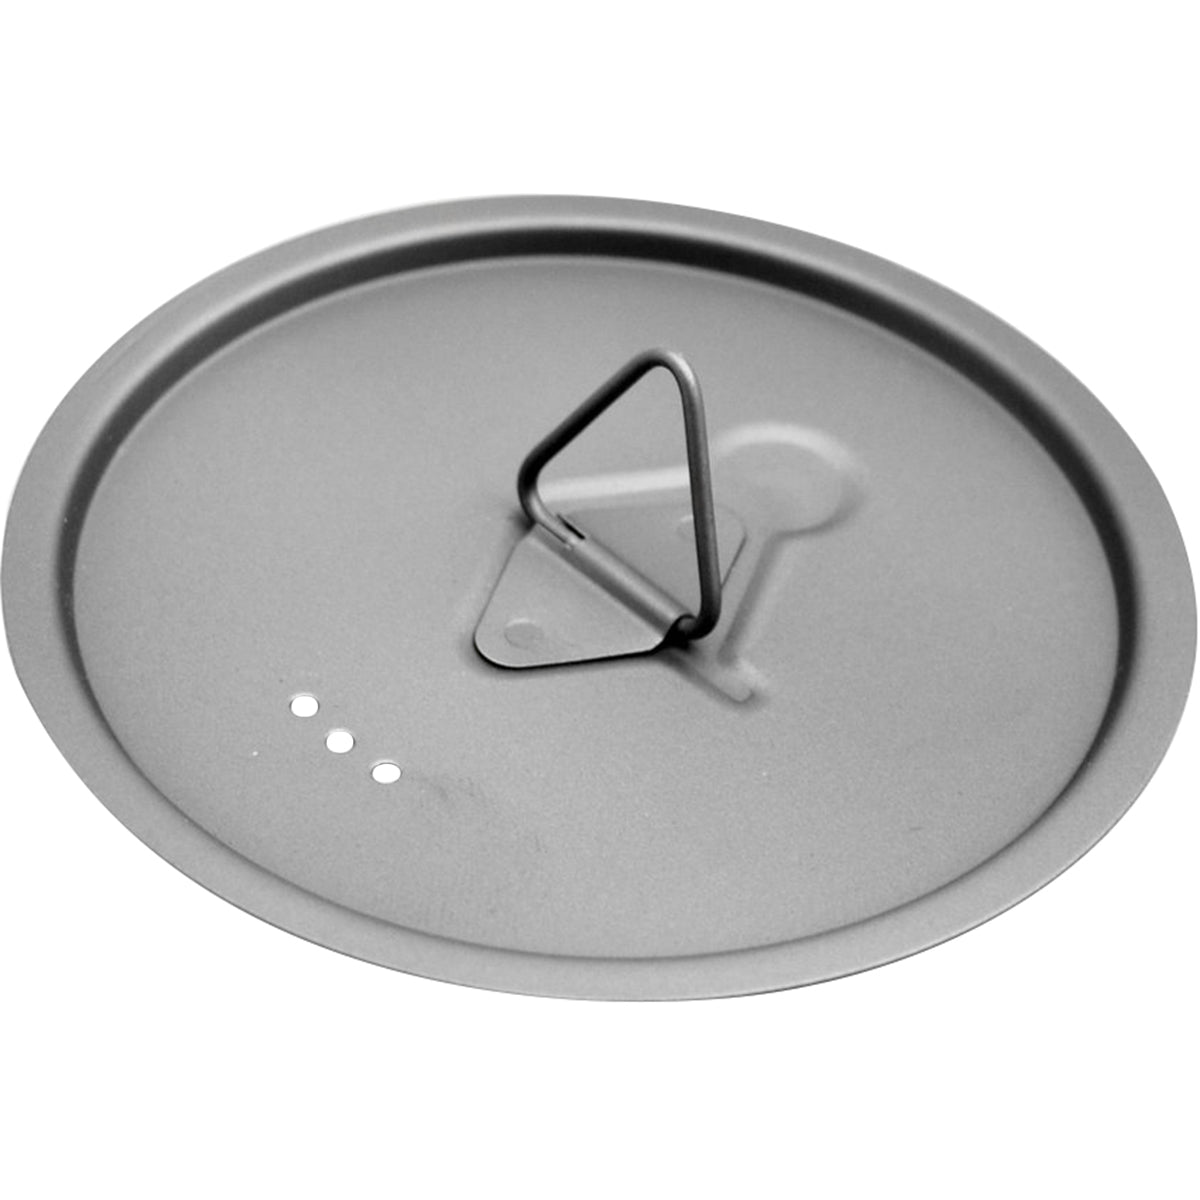 TOAKS Updated Titanium Lightweight Lid for Outdoor Camping Cook Pots and Cups TOAKS